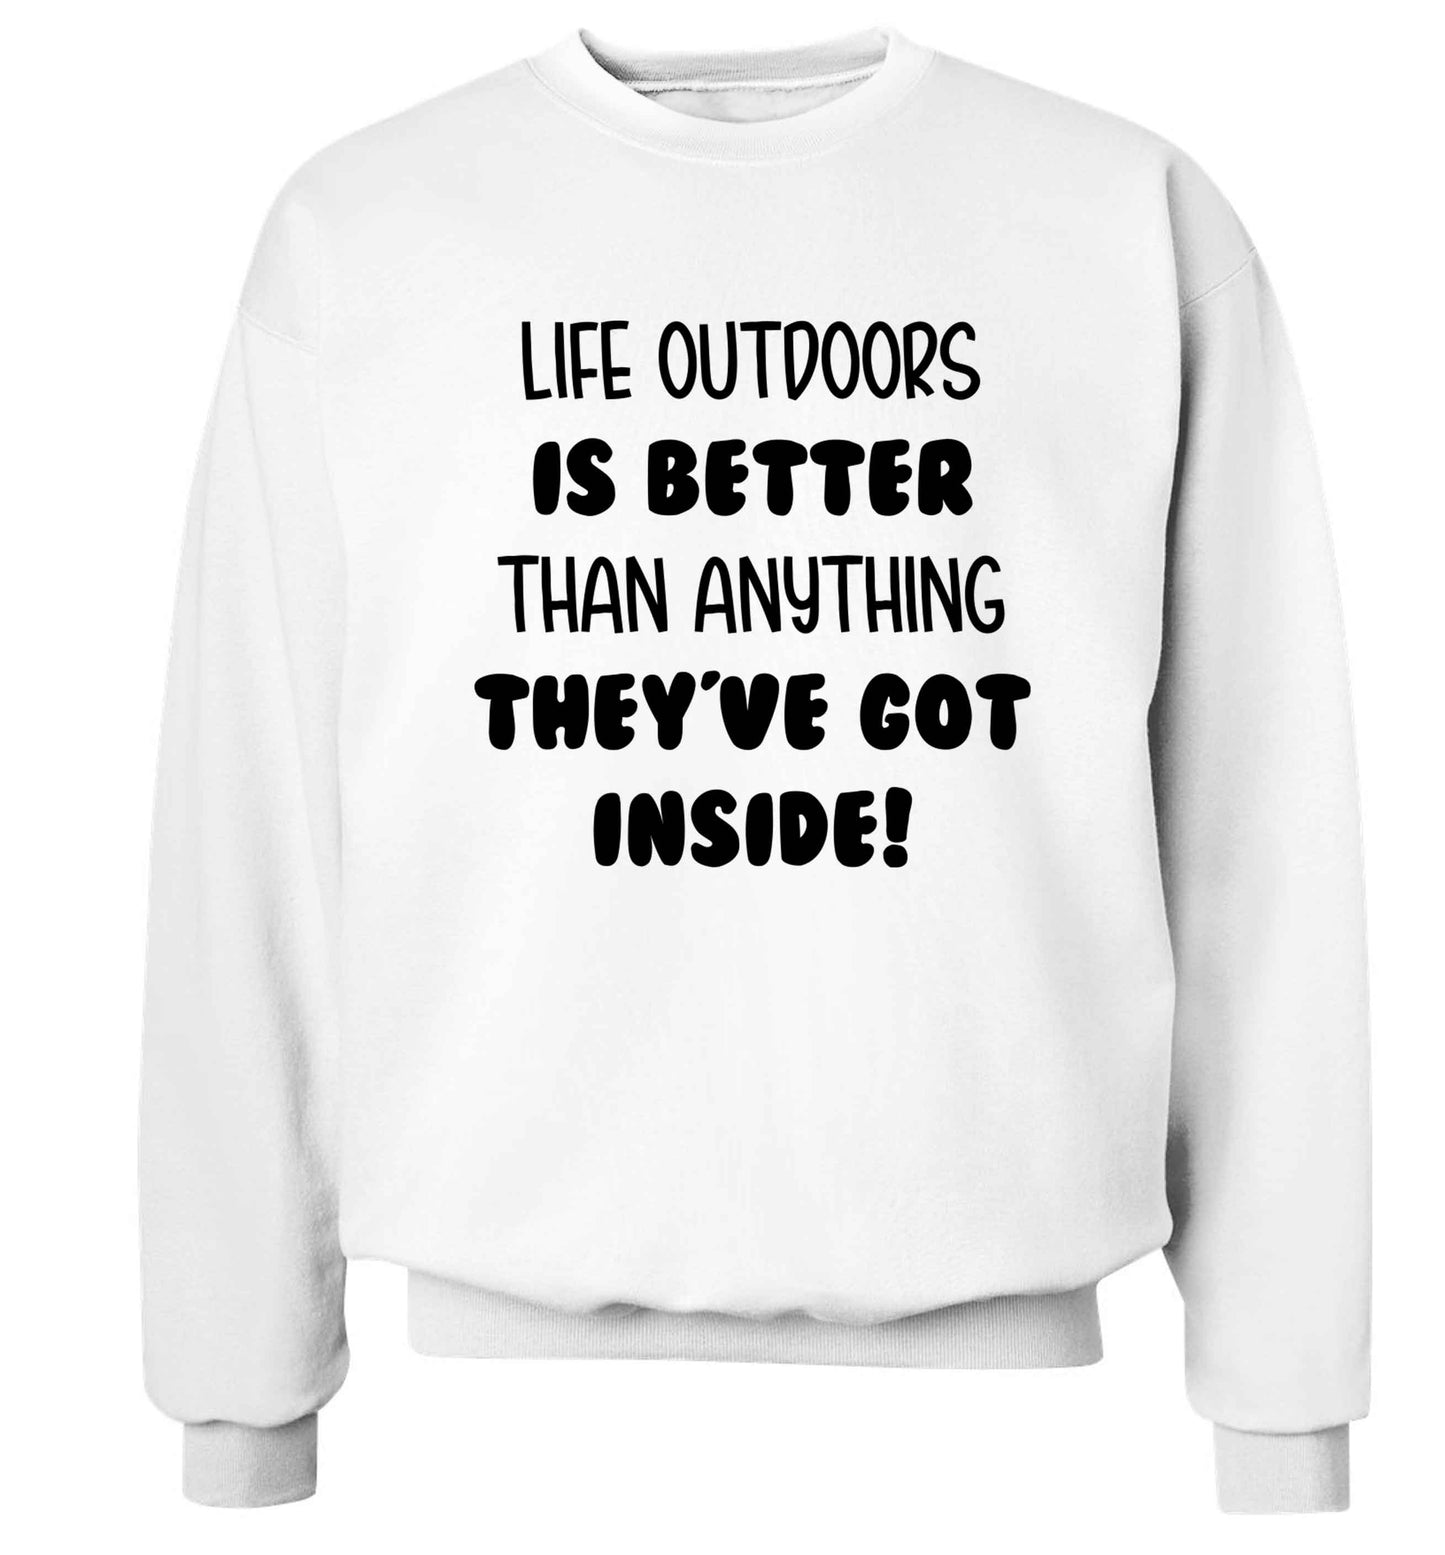 Life outdoors is better than anything they've go inside Adult's unisex white Sweater 2XL